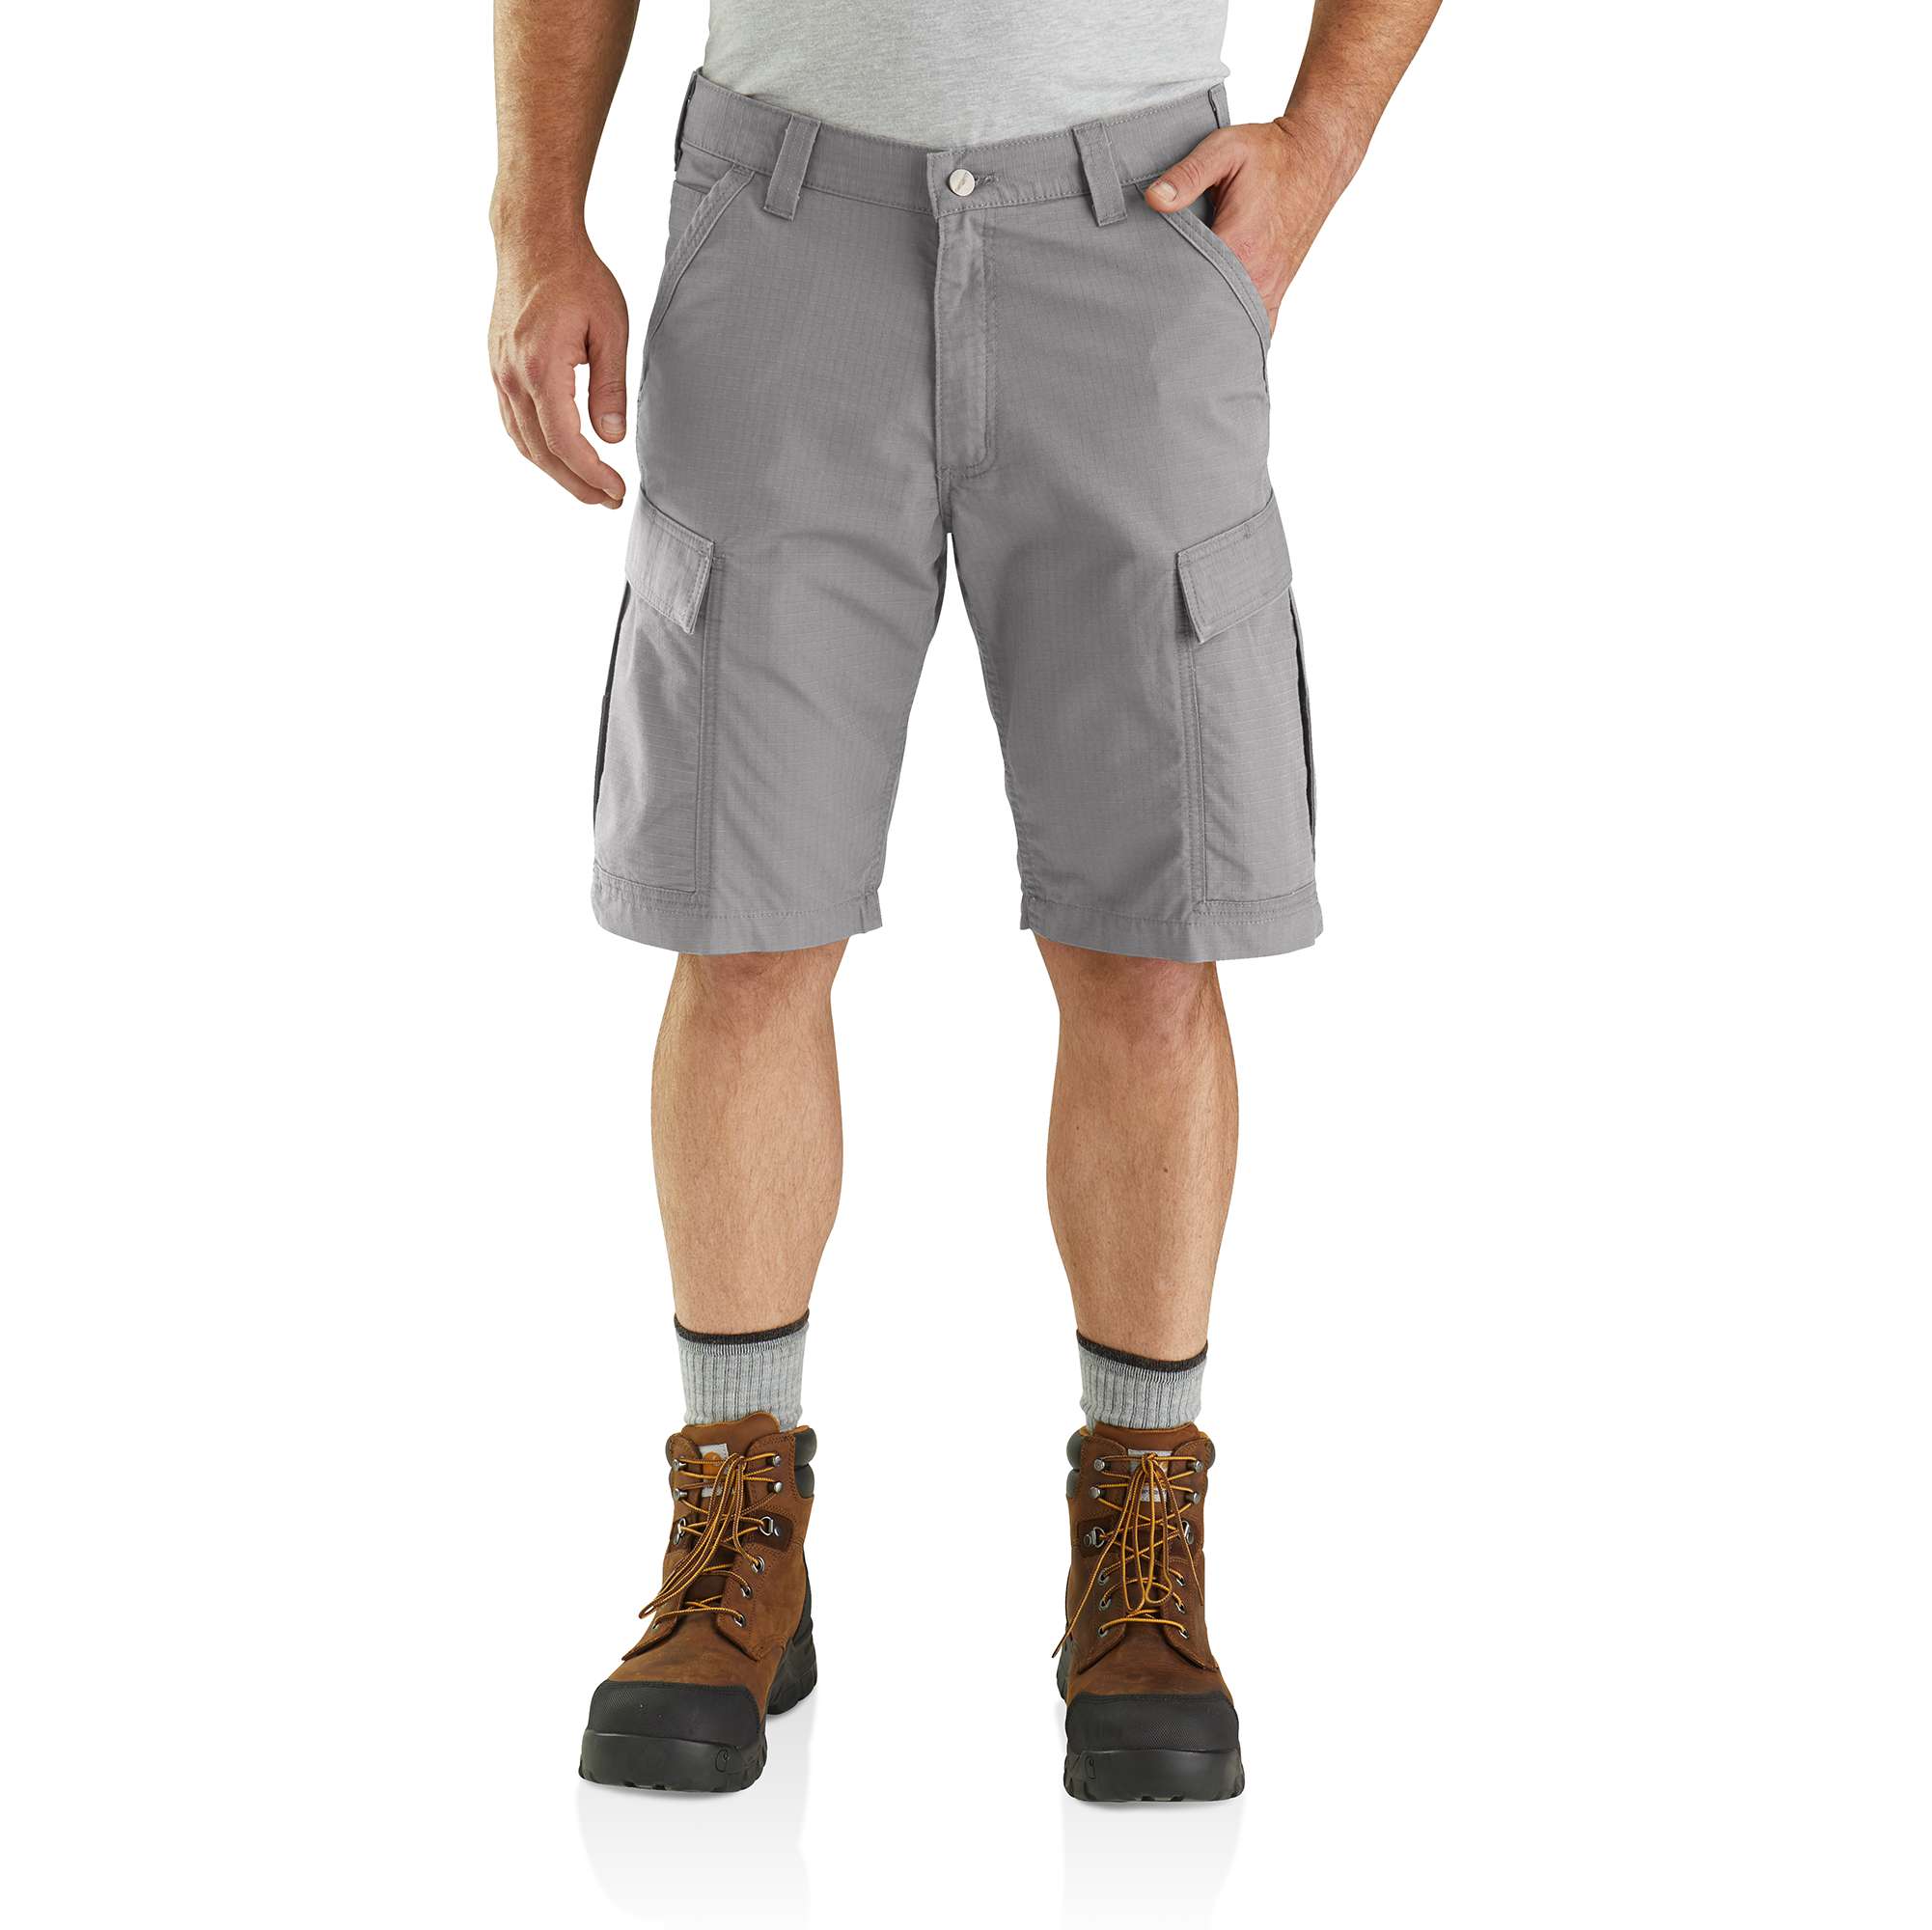 mens work boots with shorts